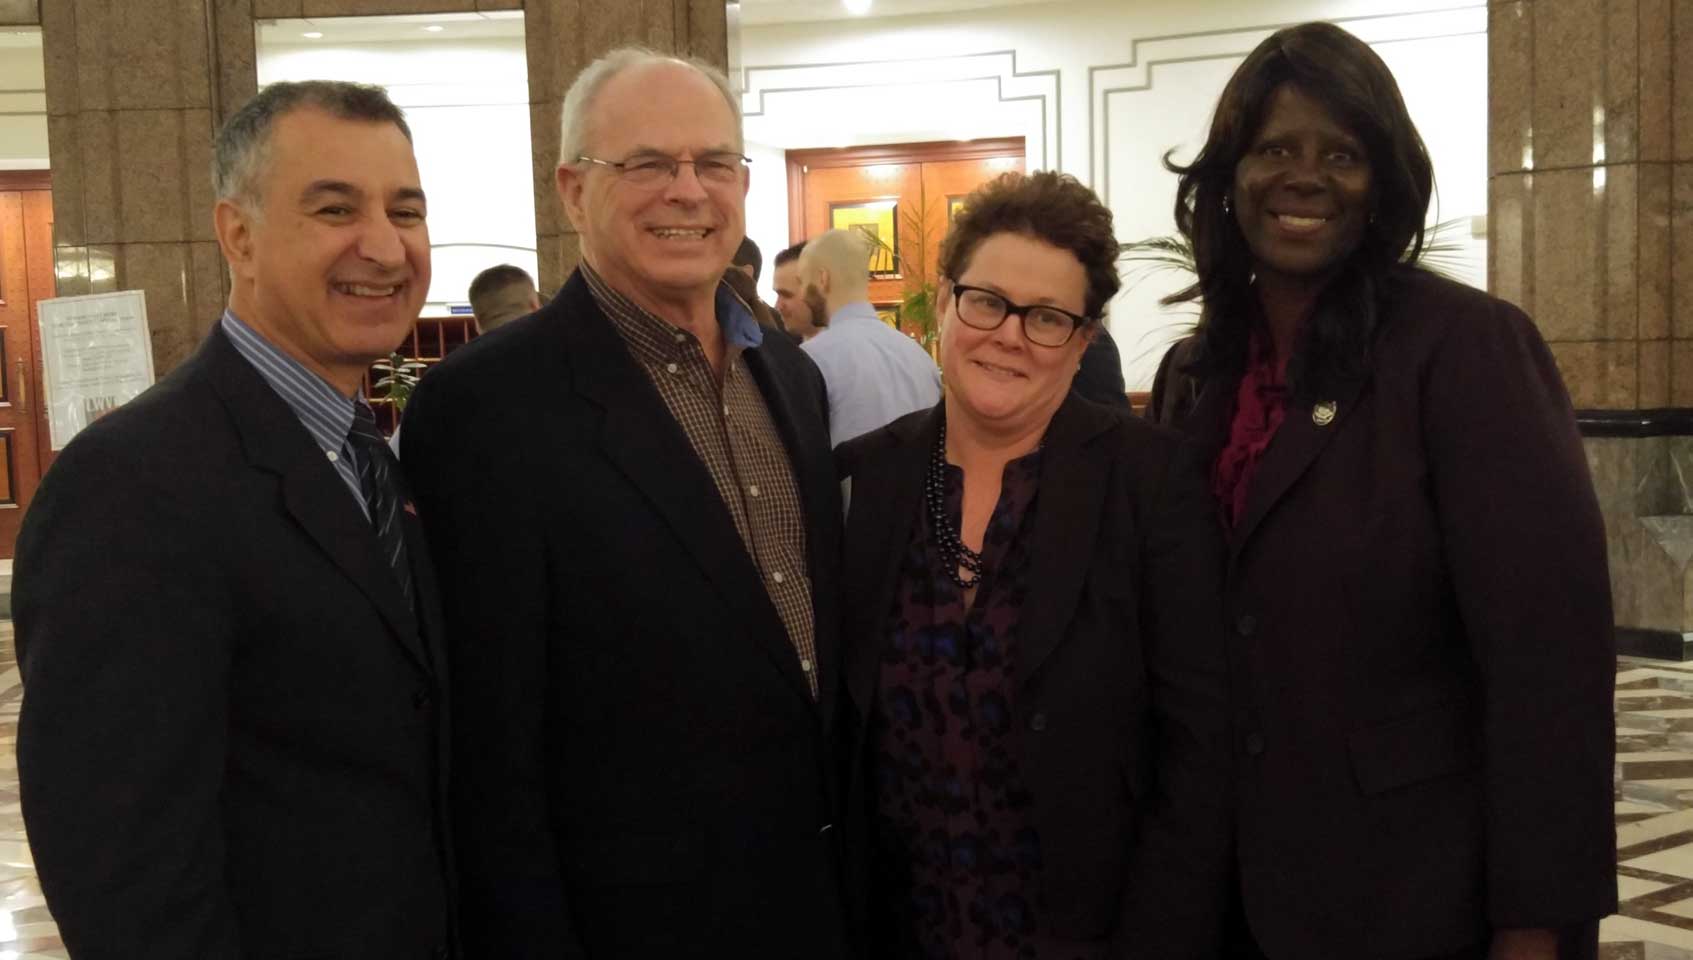 L-R: Sen. Carlo Leone, D-27; PIACT Director and Legislative Chairperson William F. Malloy Jr., CIC; Insurance Commissioner Katharine L. Wade; and Rep. Patricia Billie Miller, D-145.